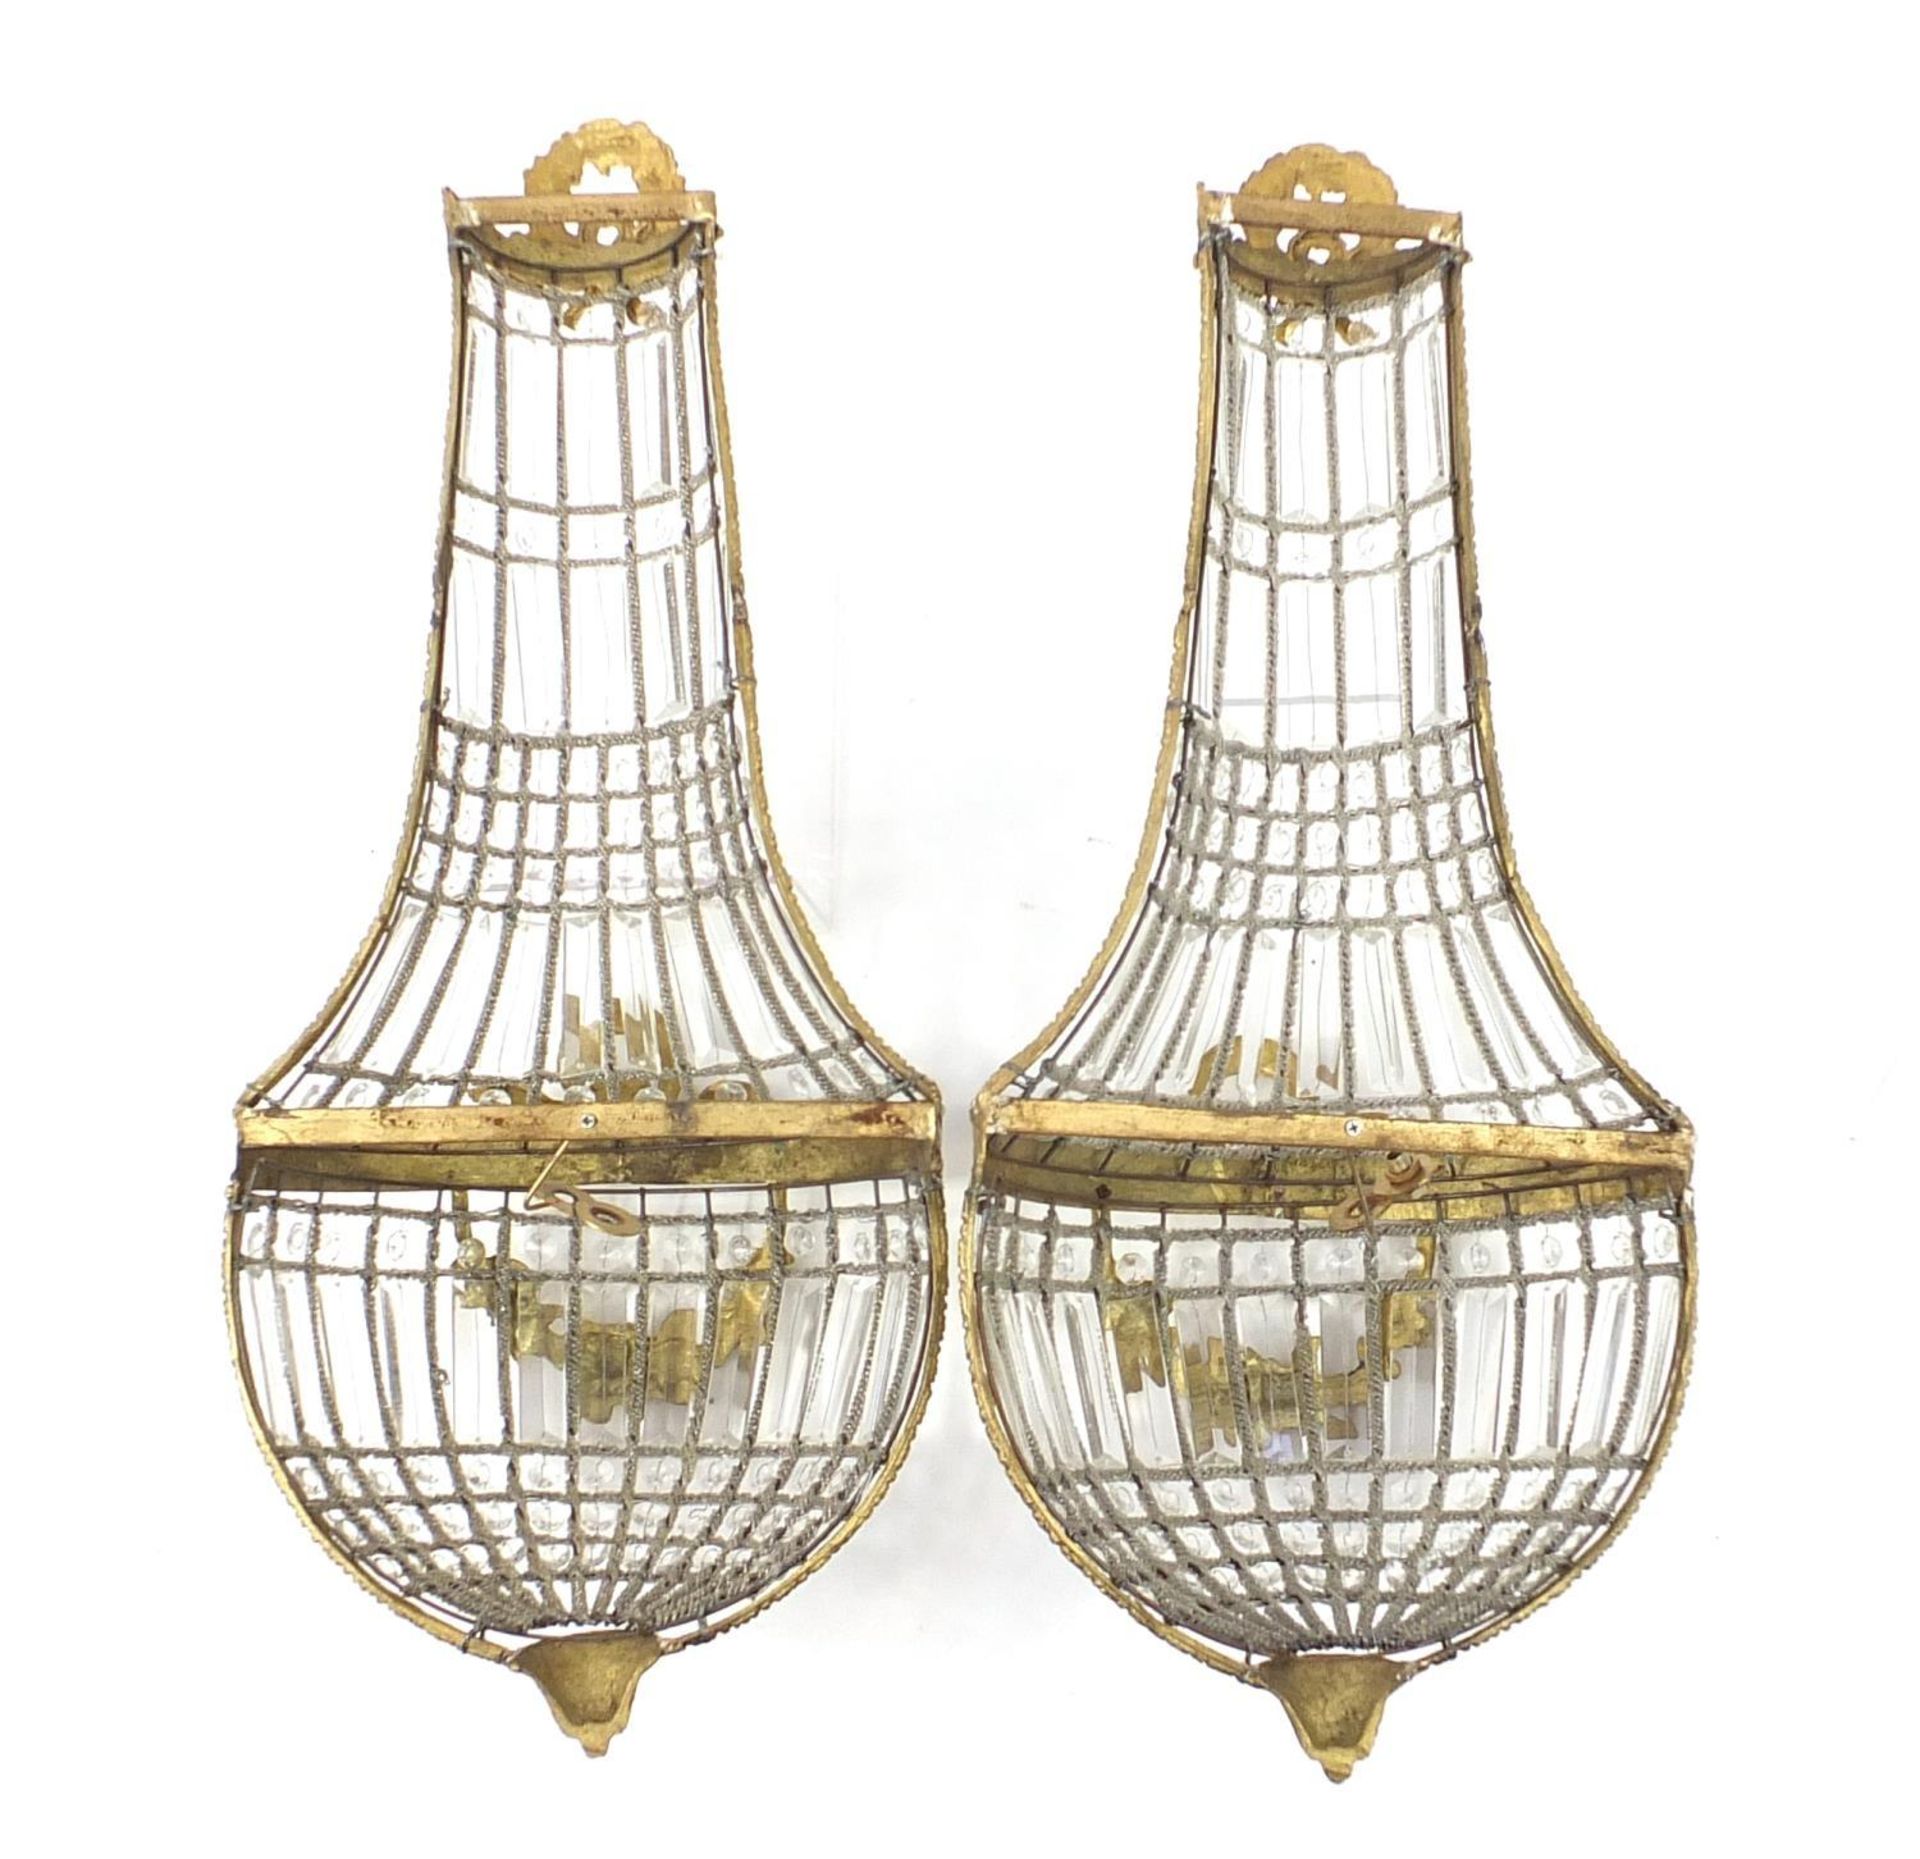 Pair of ornate gilt metal chandelier design wall sconces with bow design, each 71cm high : - Image 2 of 2